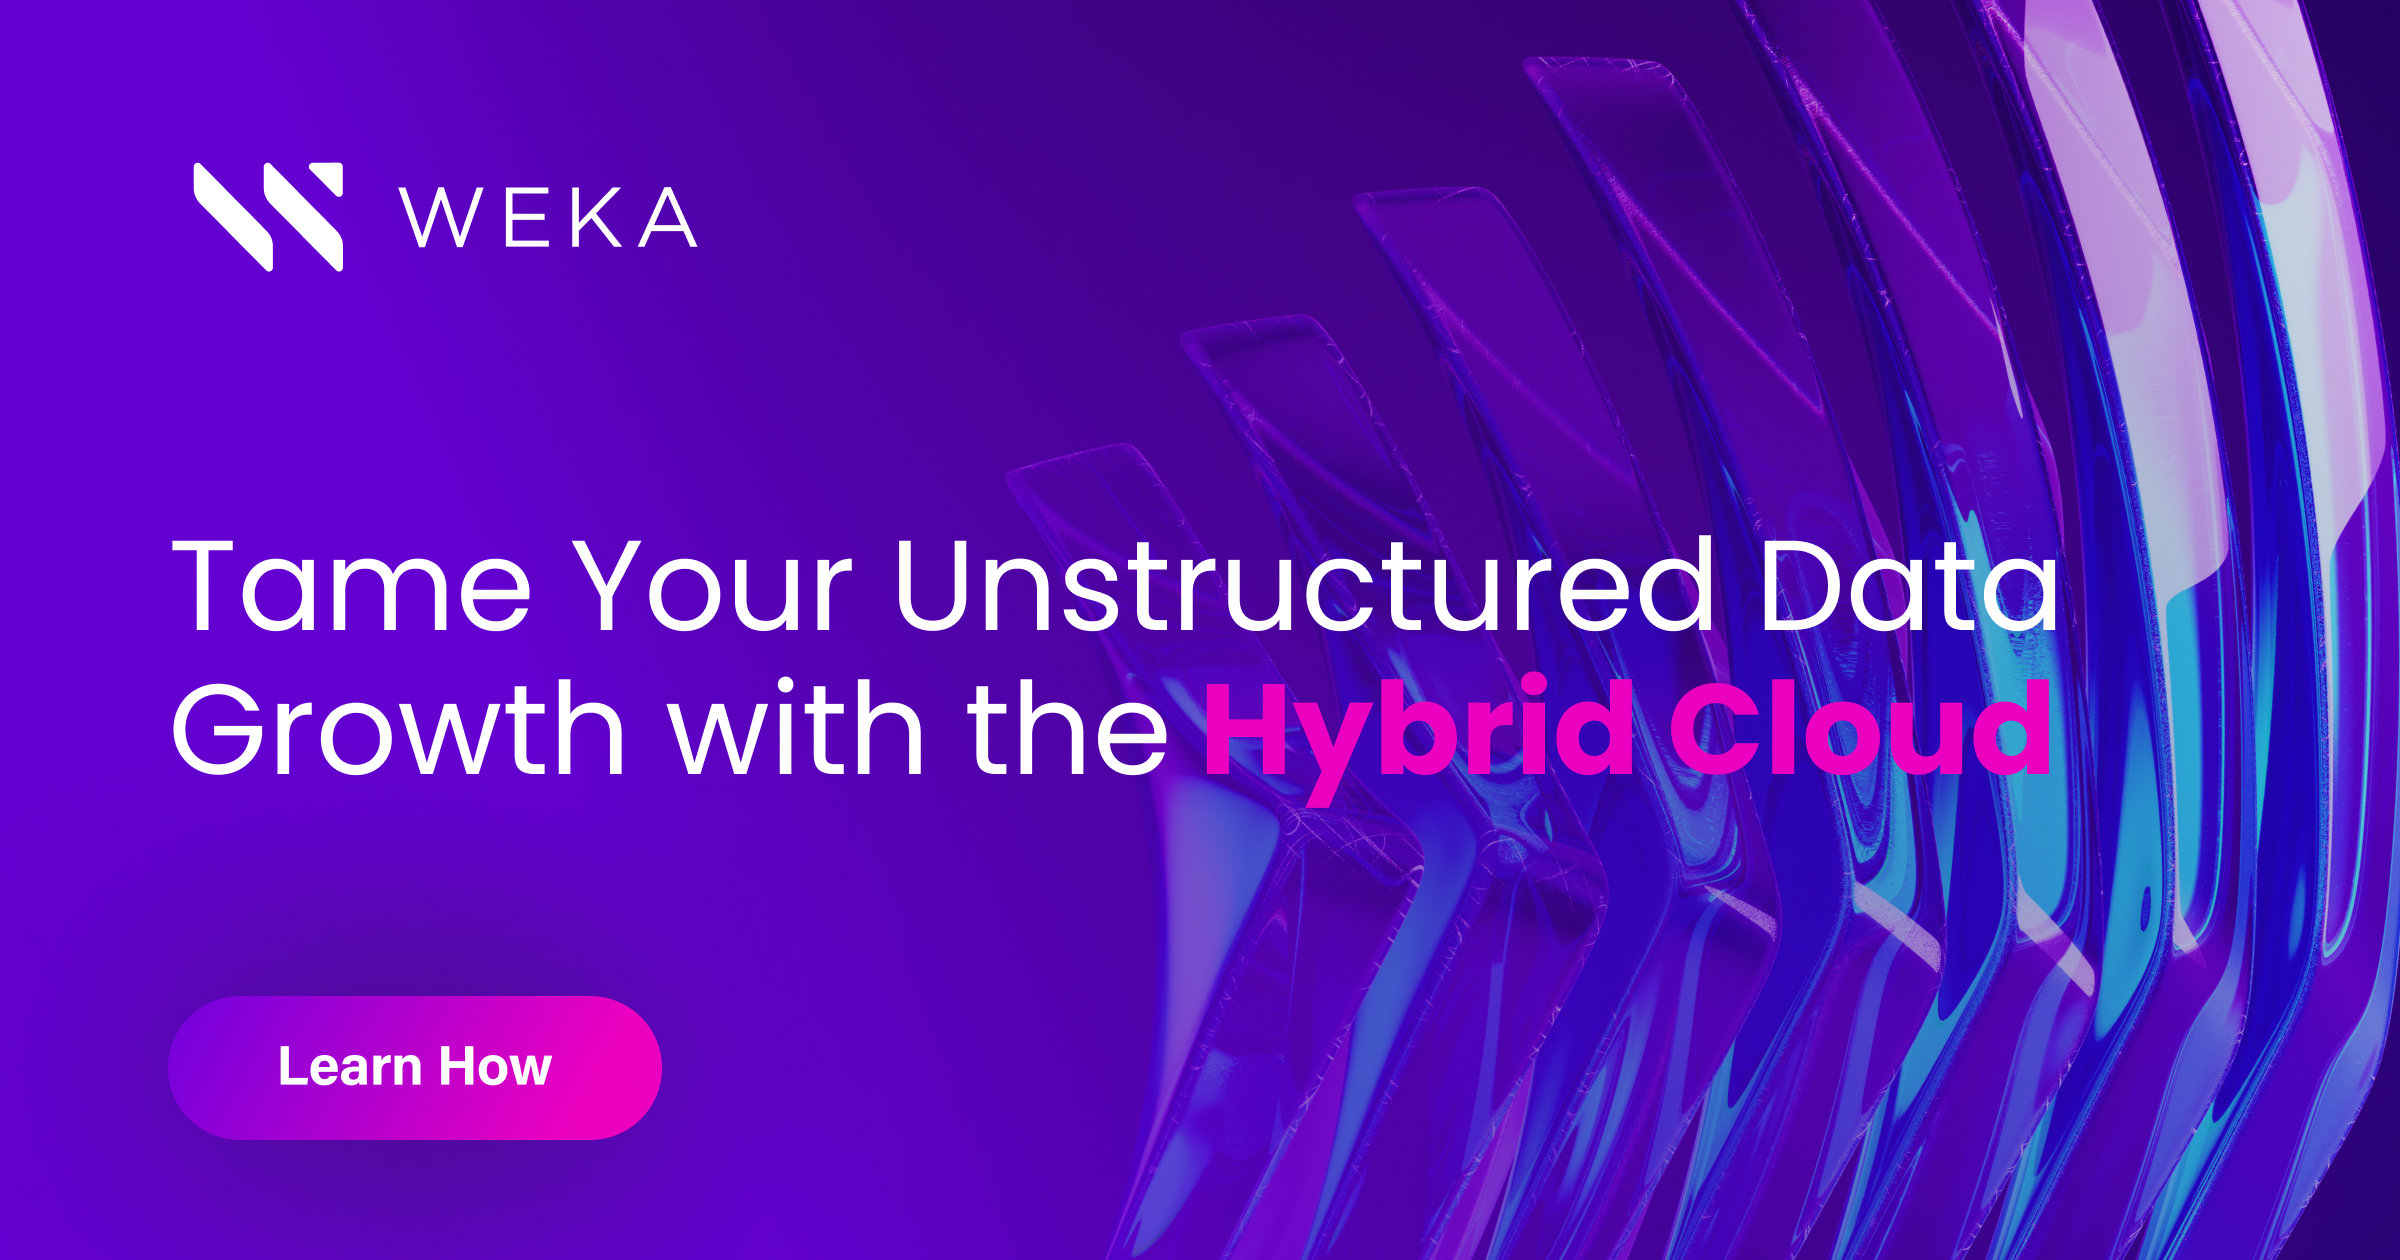 Tame Your Unstructured Data Growth